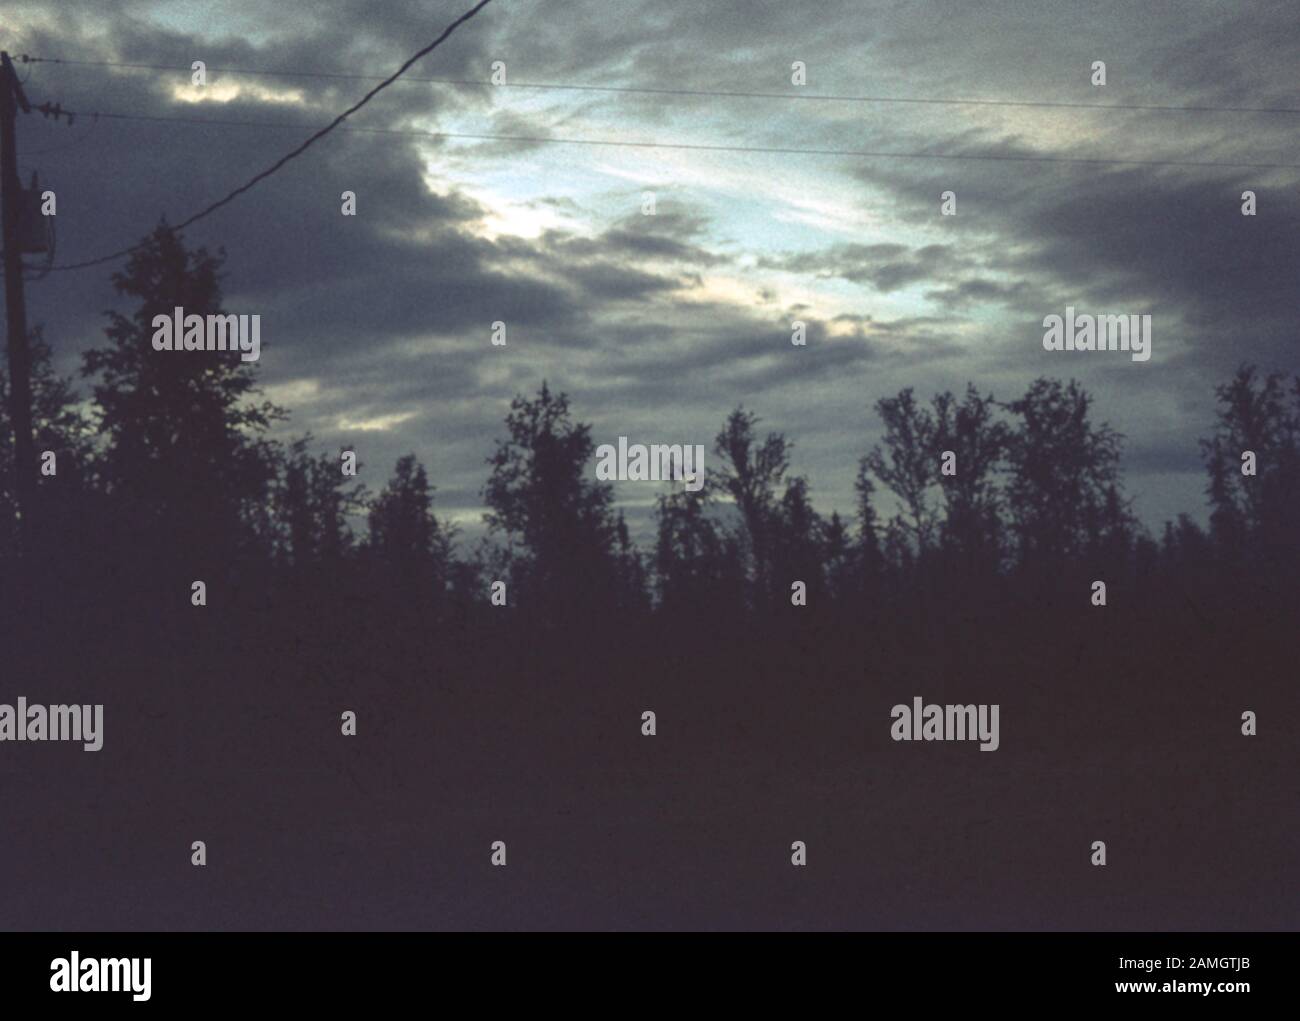 Vernacular photograph taken on a 35mm analog film transparency, believed to depict silhouette of trees under cloudy sky during daytime, 1965. Major topics/objects detected include Sky, Cloud, Nature, Tree, Light, Evening, Landscape, Sunset, Dusk and Wood. () Stock Photo